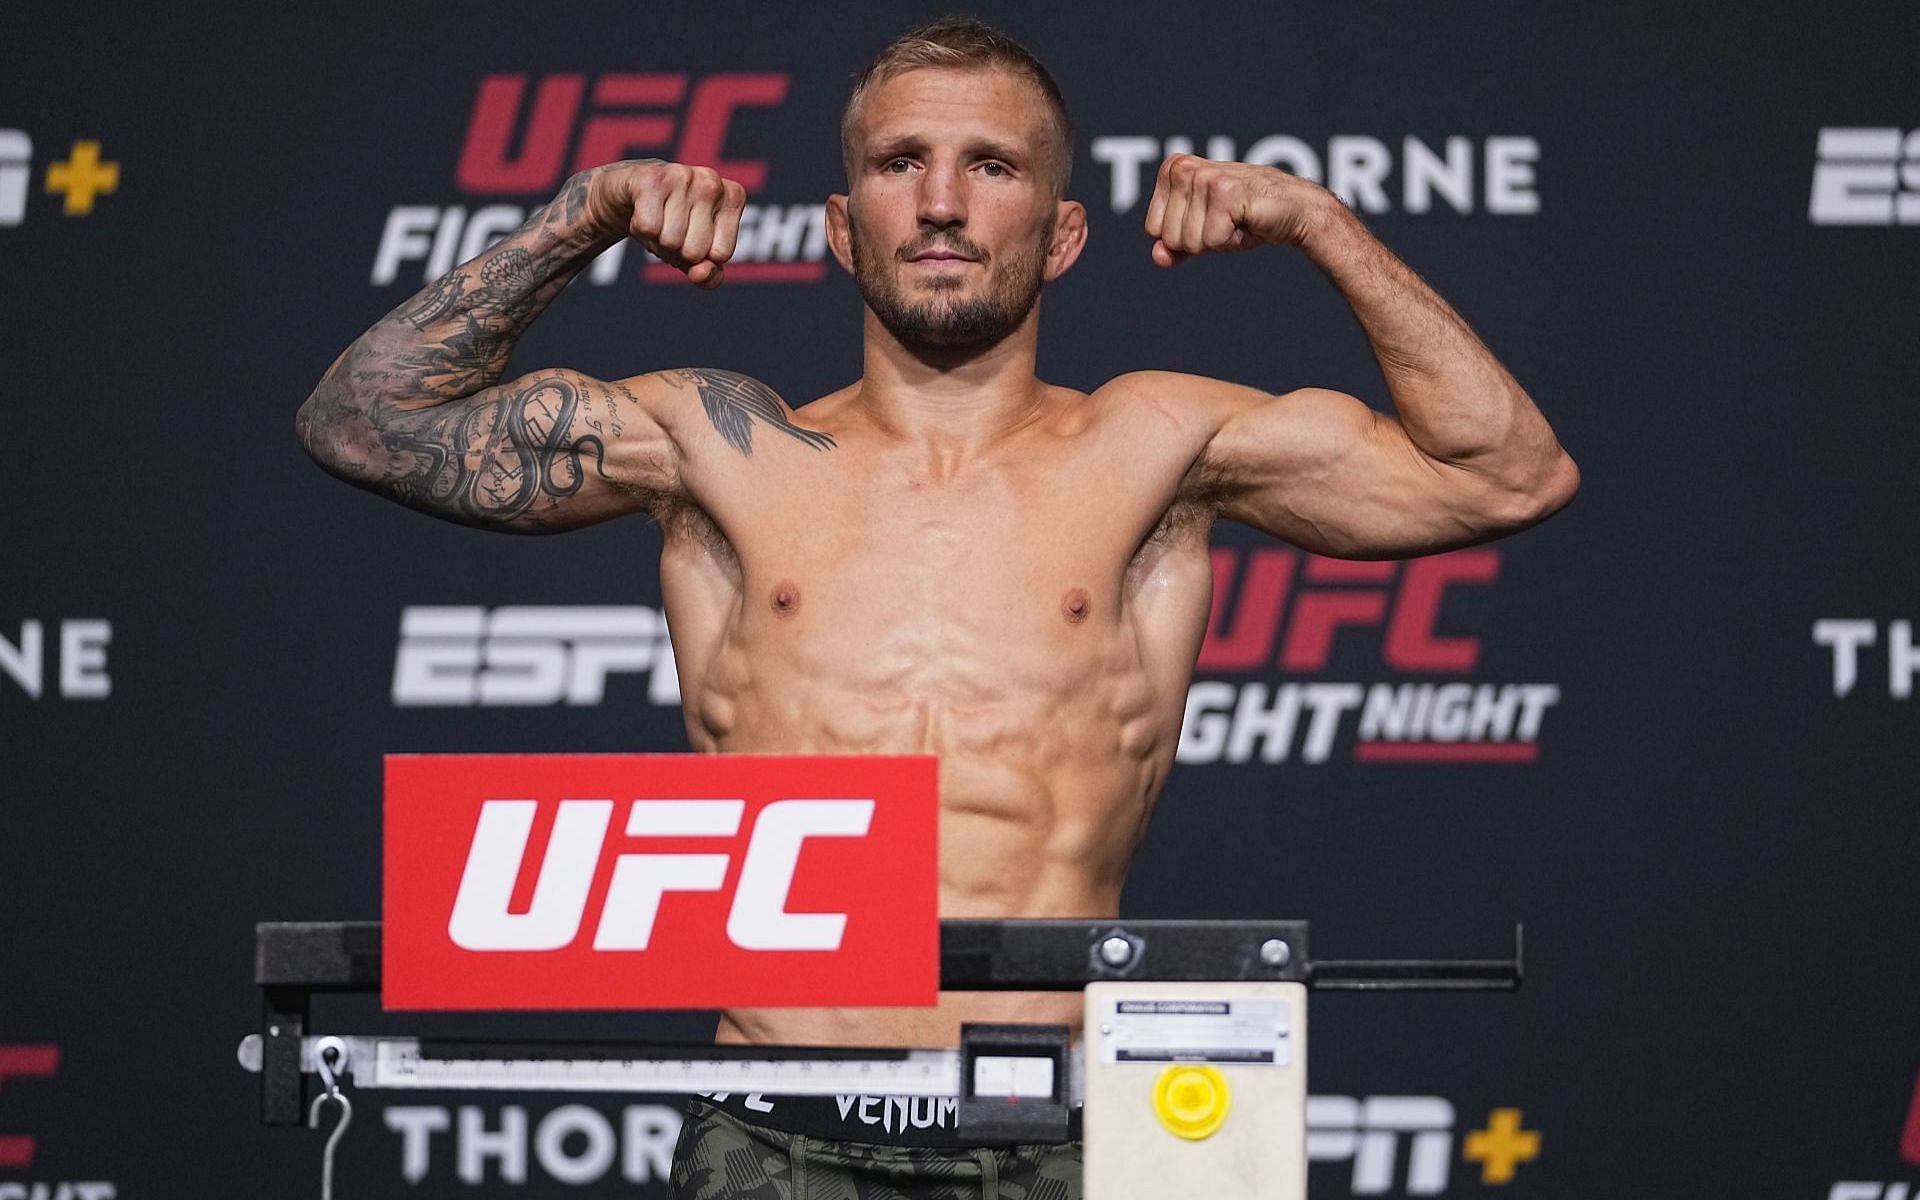 TJ Dillashaw has provided fans with an update regarding his impending return to competition